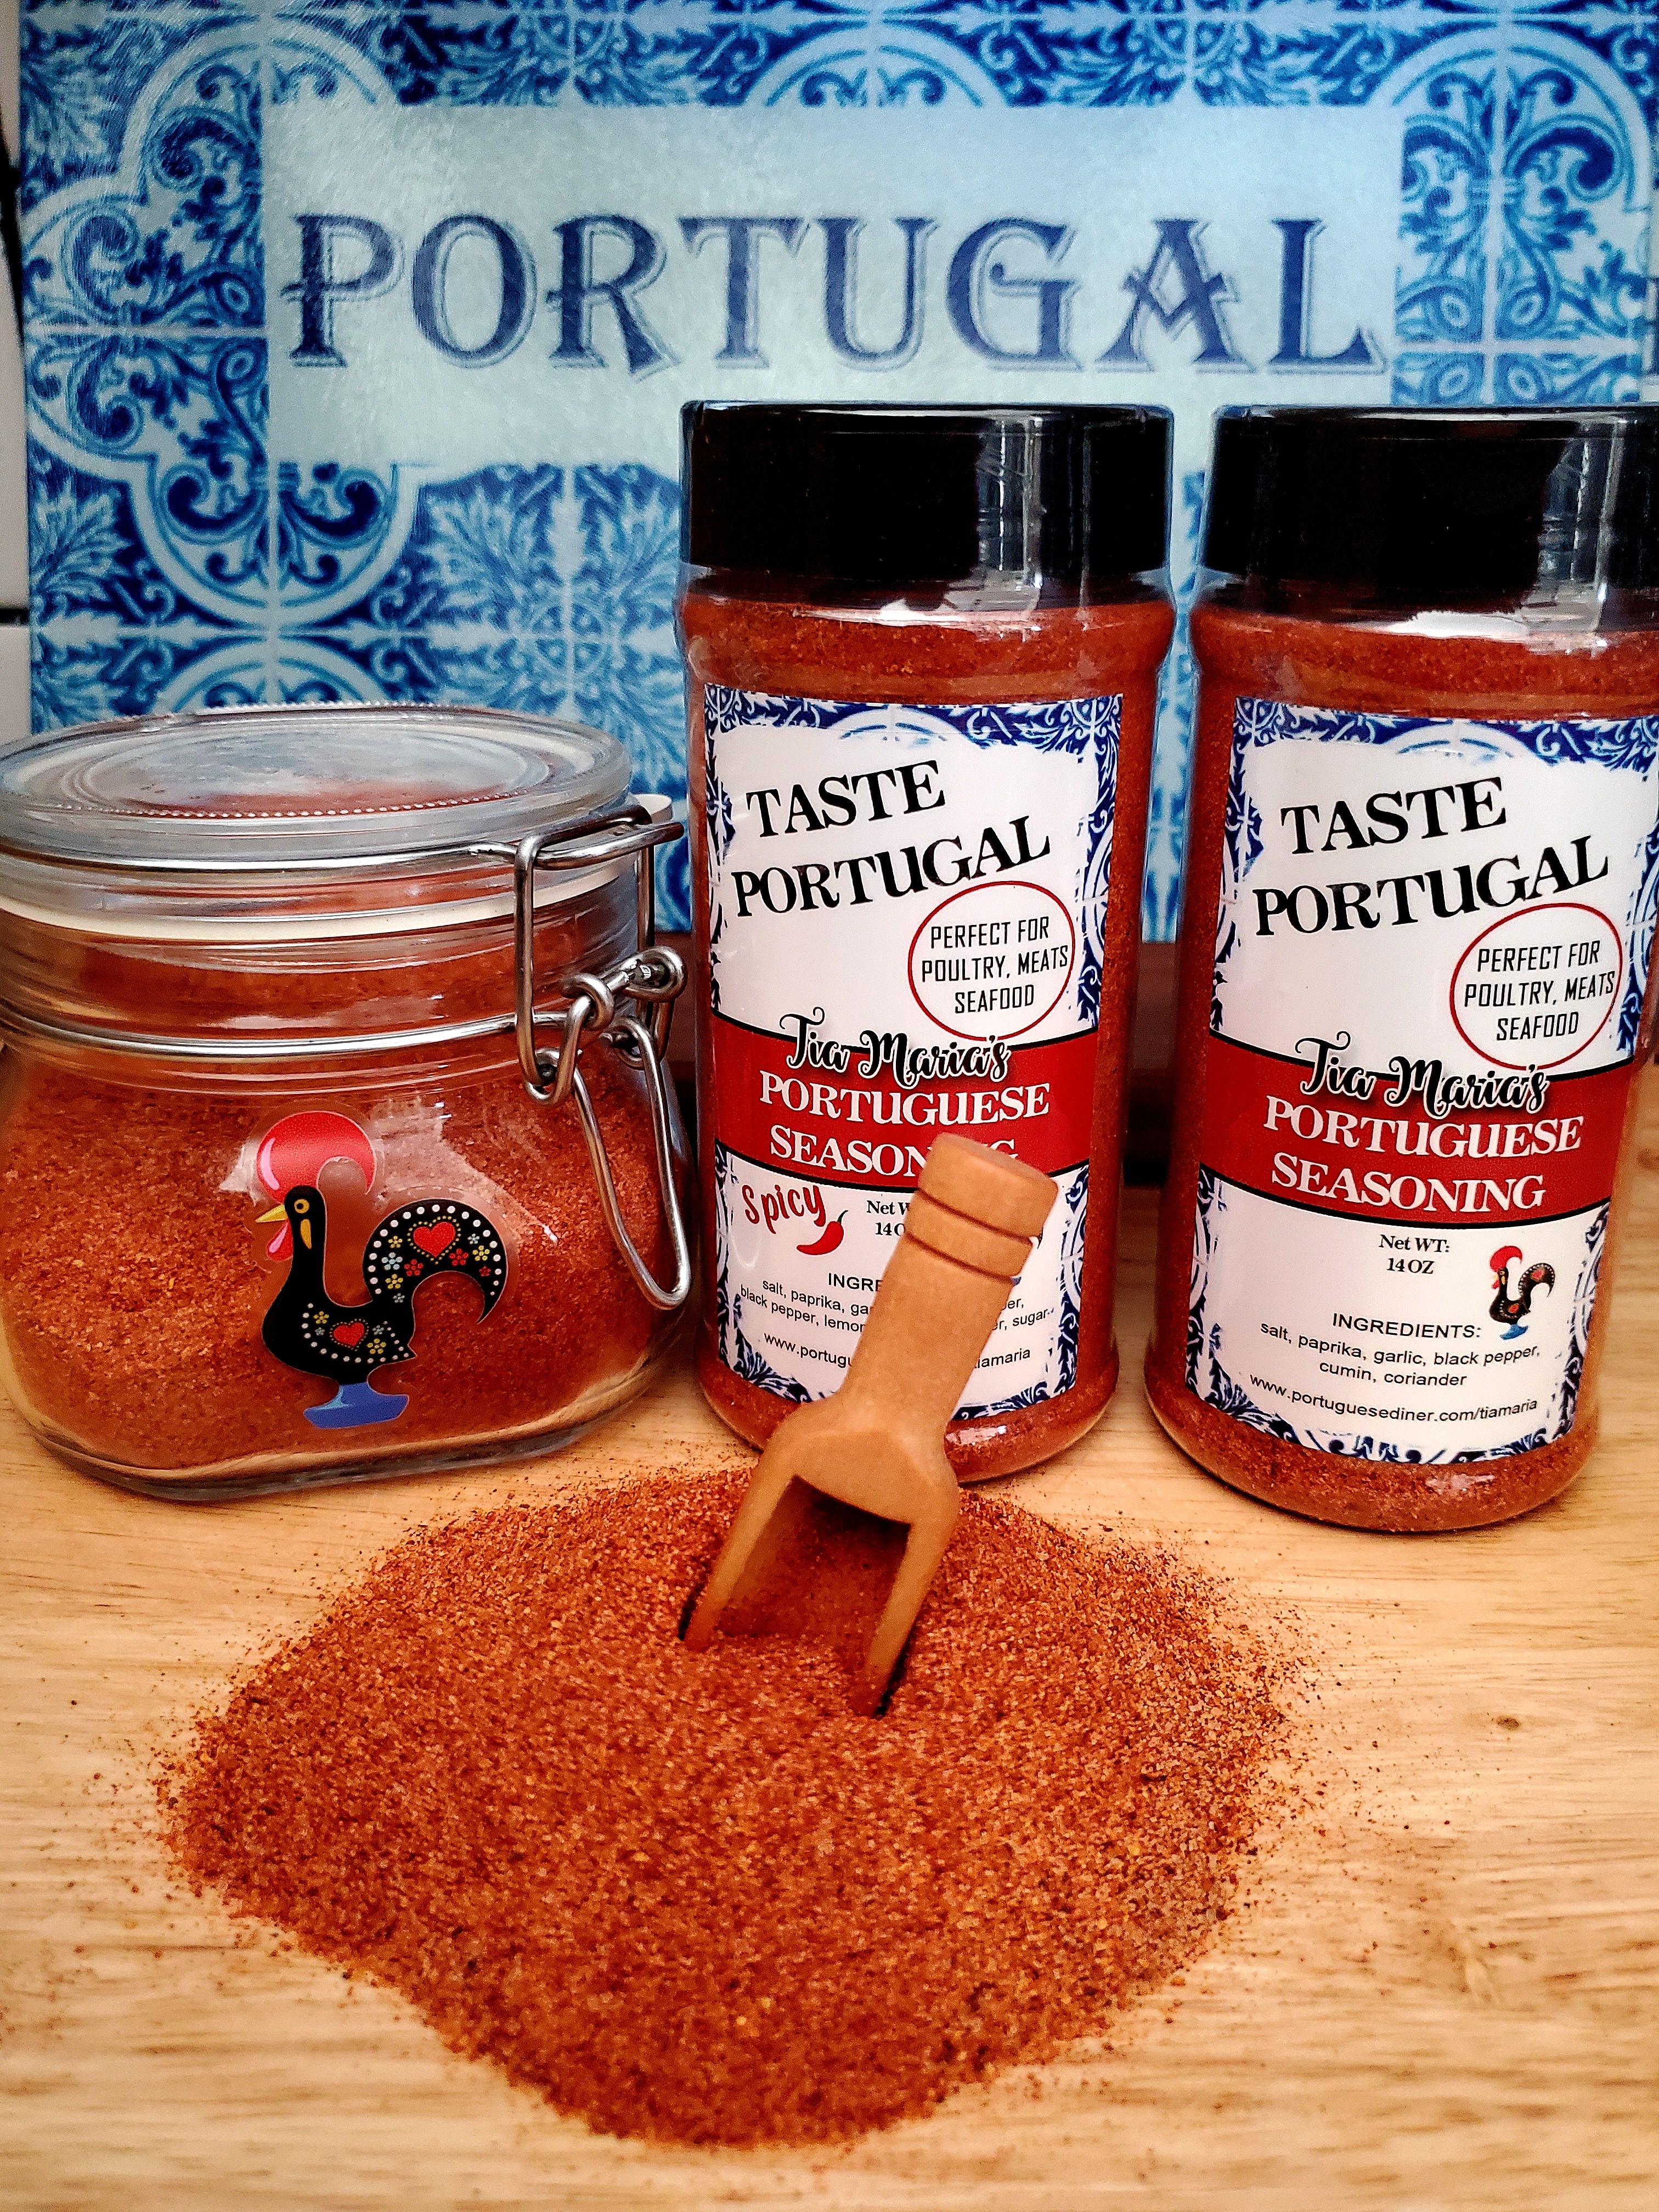 BUY NOW: TASTE PORTUGAL SEASONING – ETSY SHOP – FREE SHIPPING IN USA Taste Portugal with our set of 2 custom blend of seasonings that will bring the flavors of Portugal to all of your recipes. Use on poultry, meats, seafood and even vegetables. Add a “spicy” kick with the red chili pepper spicy blend. So convenient to use 